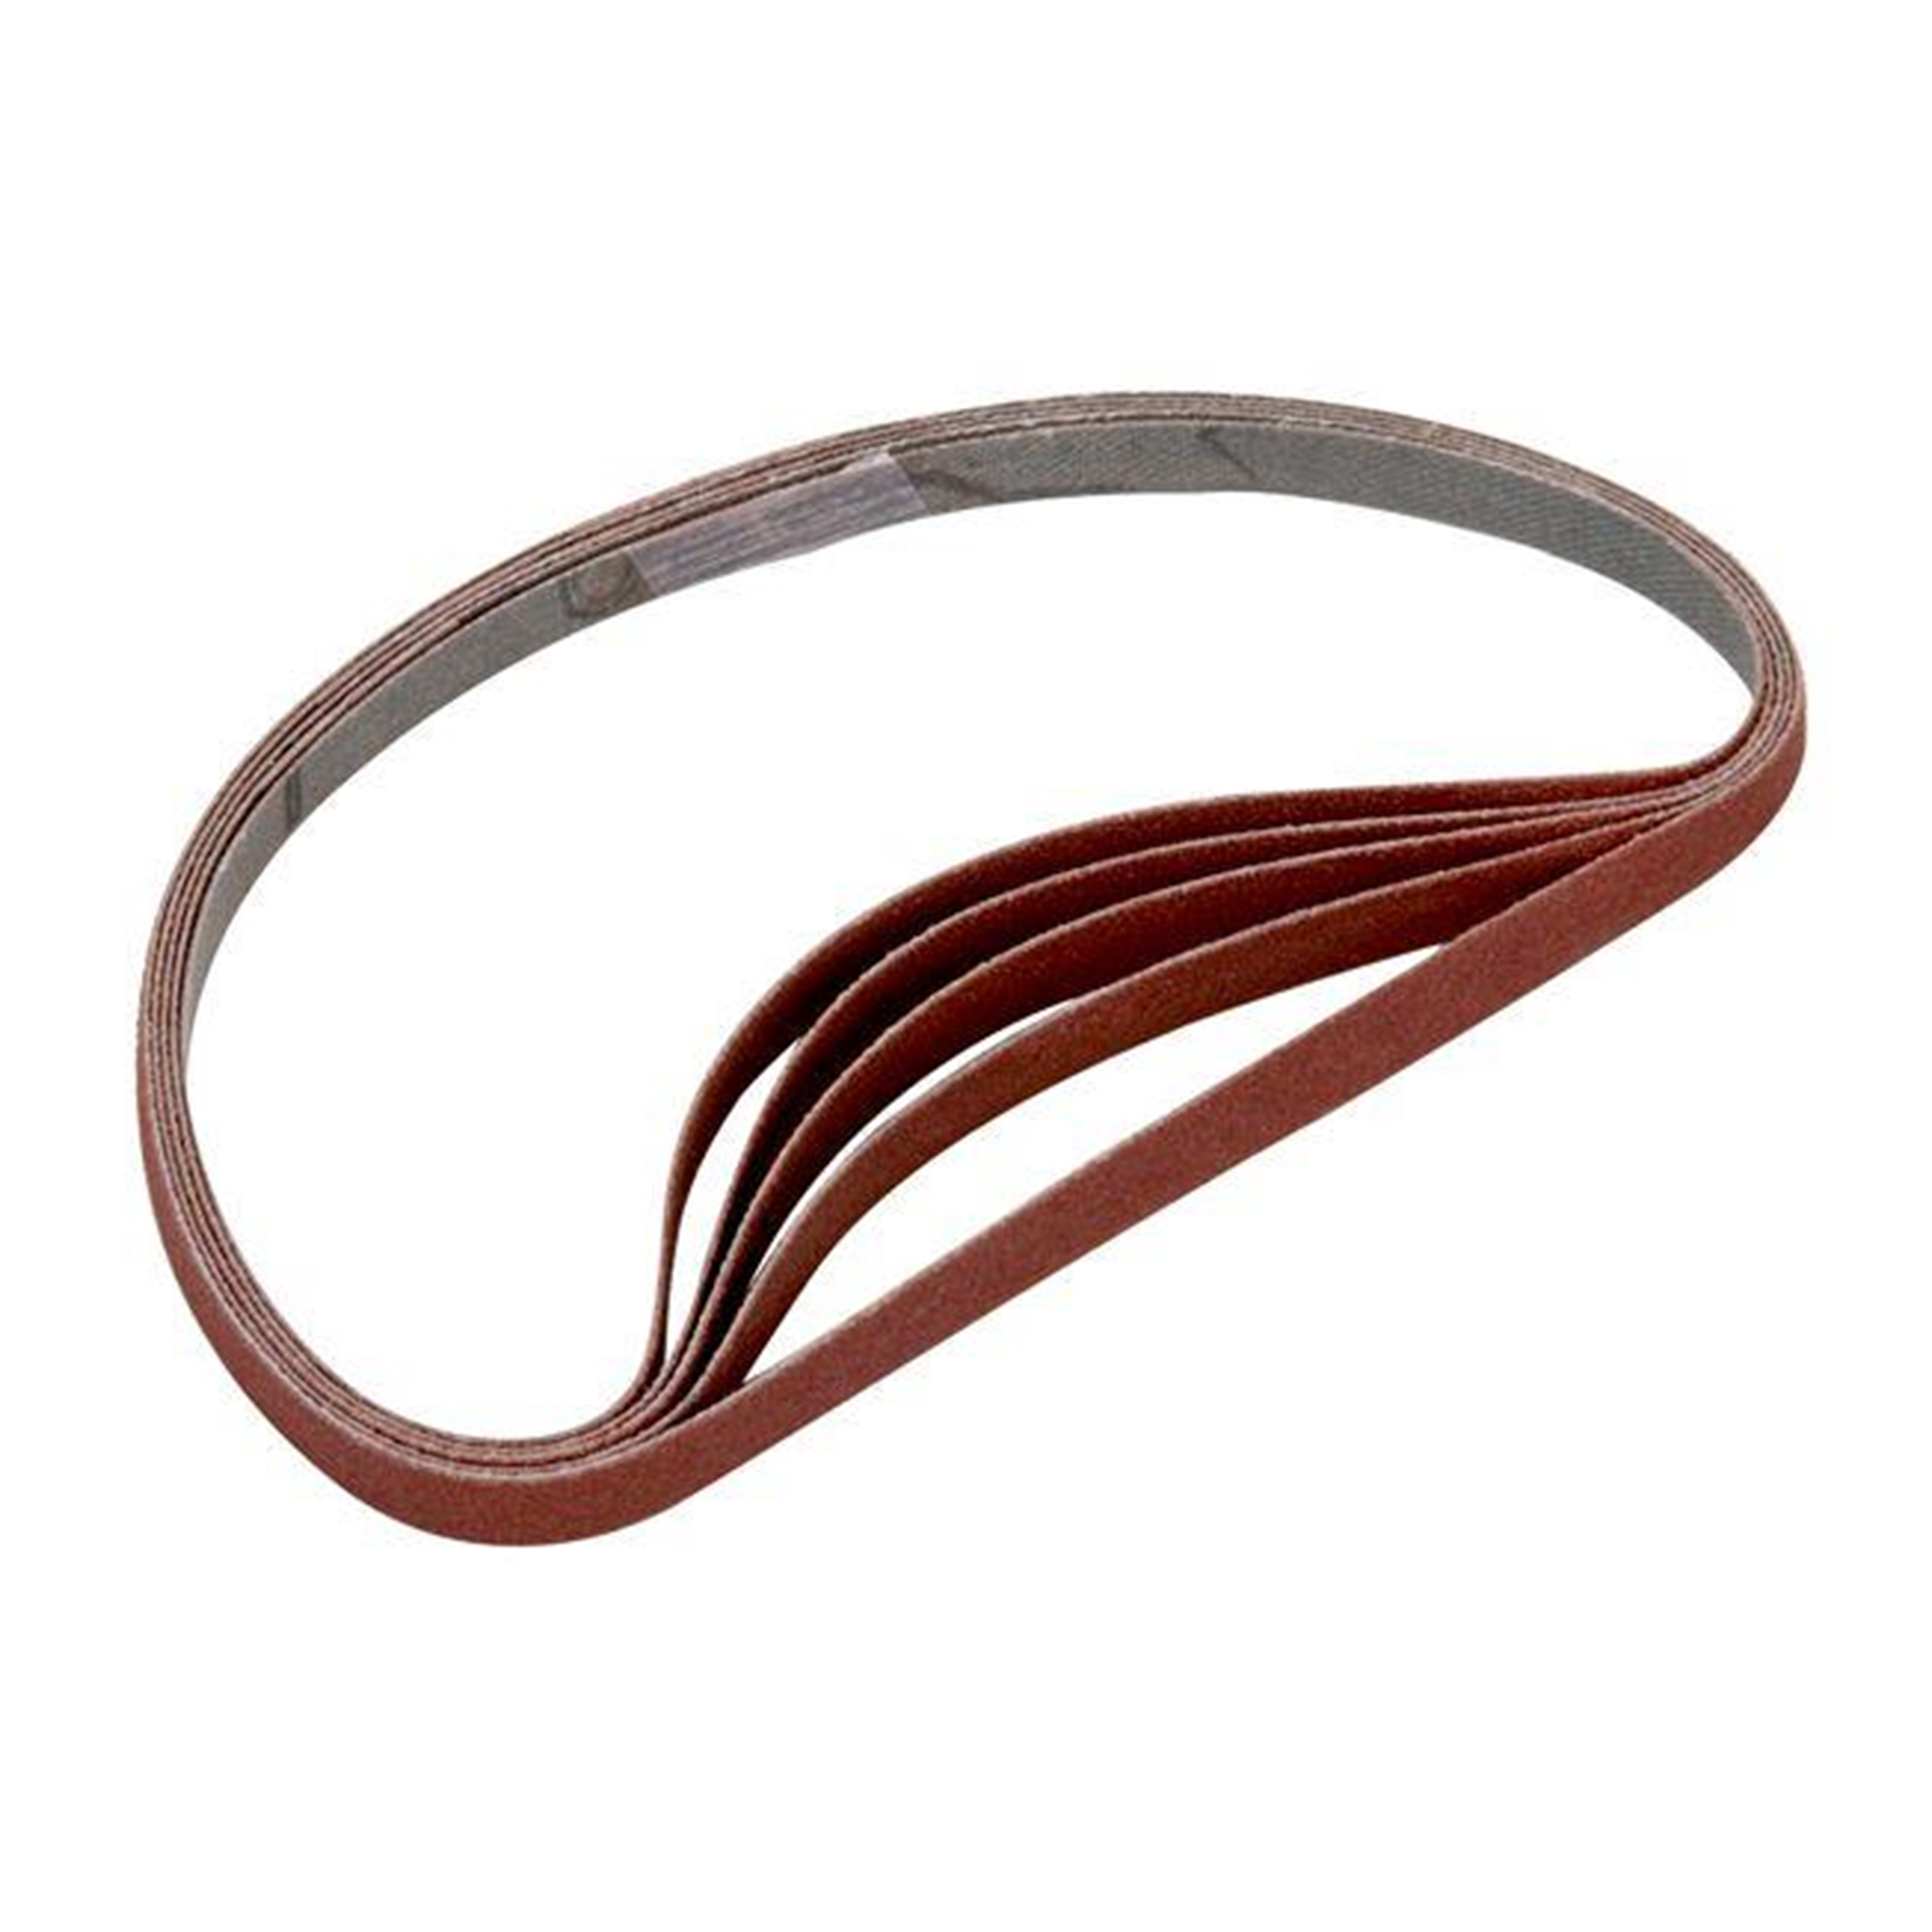 Sanding Stick Replacement Belts, 240 Grit, 5 Pack